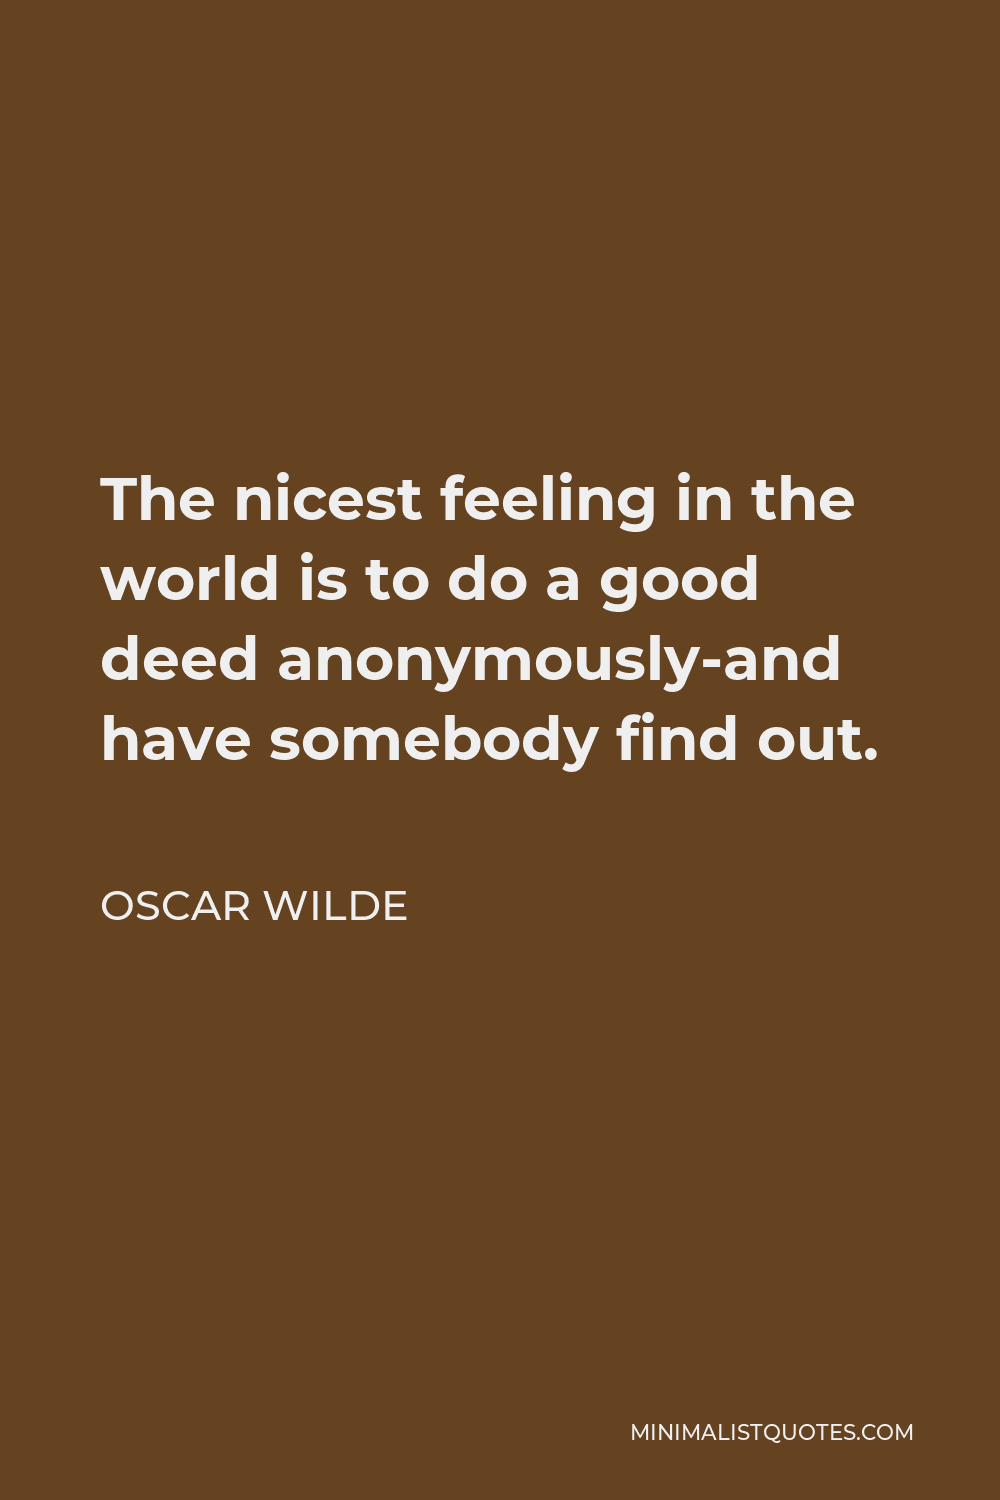 Oscar Wilde Quote - The nicest feeling in the world is to do a good deed anonymously-and have somebody find out.